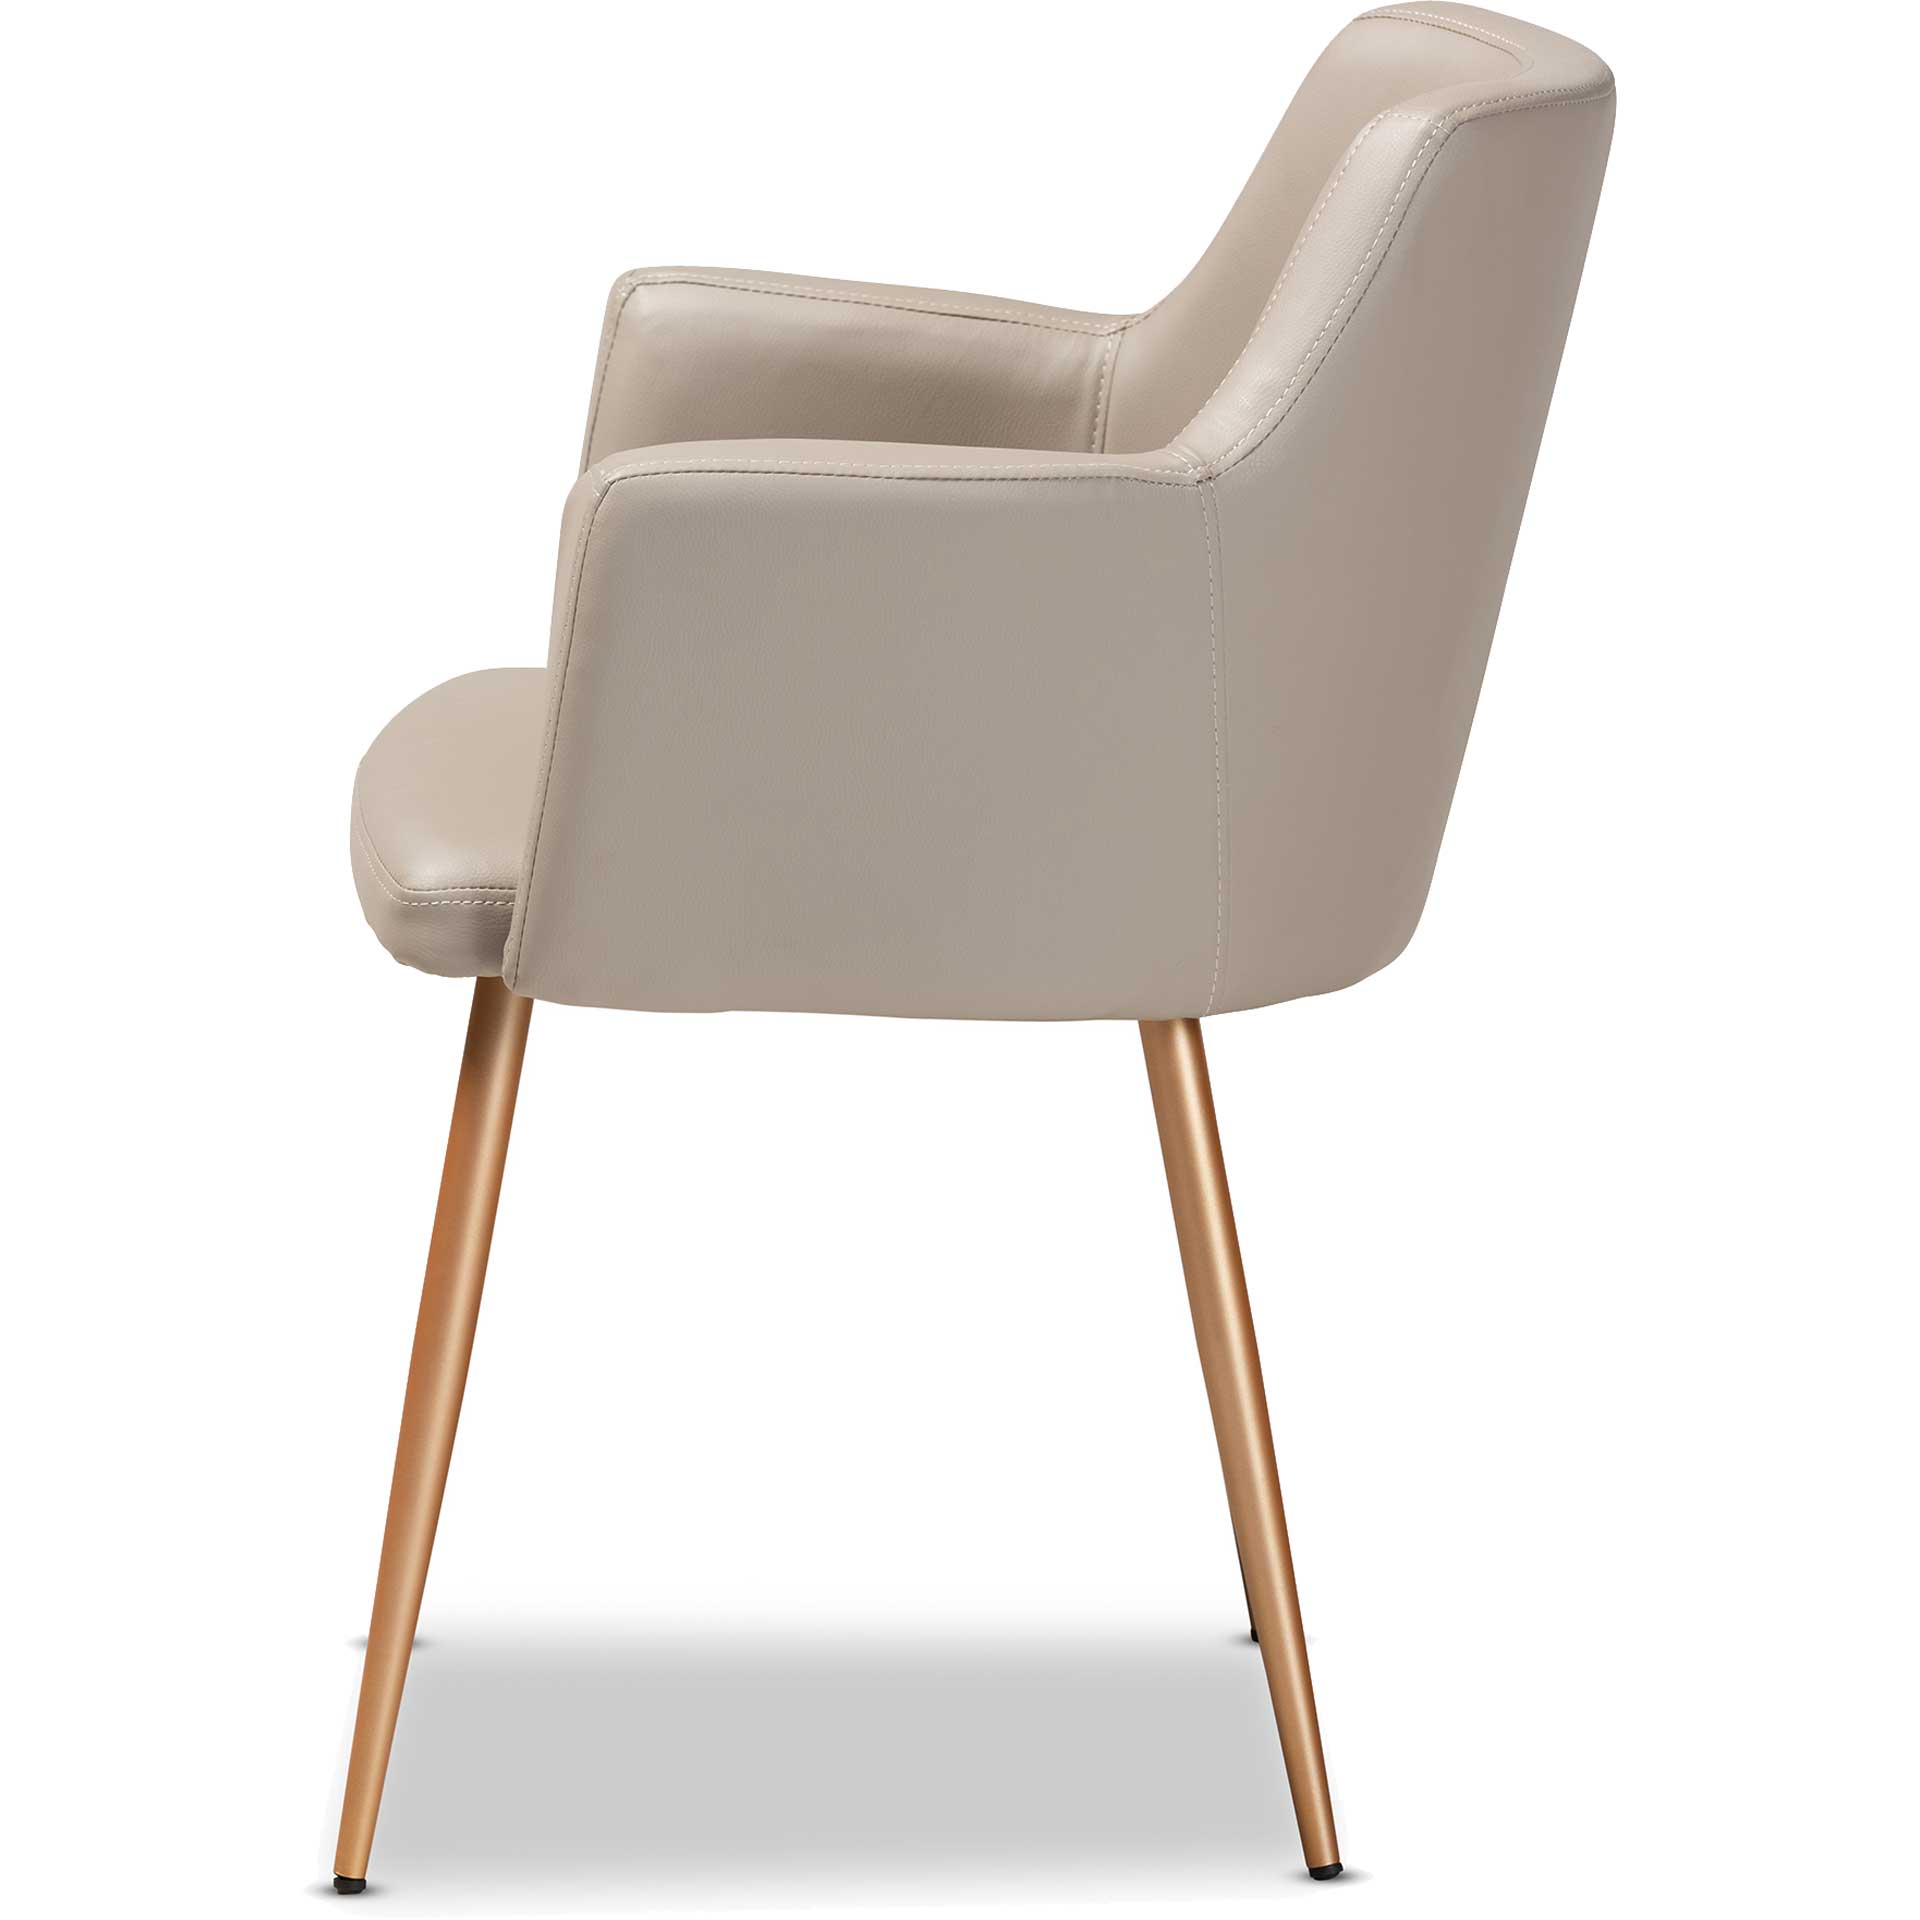 Macari Faux Leather Upholstered Dining Chair Beige/Gold